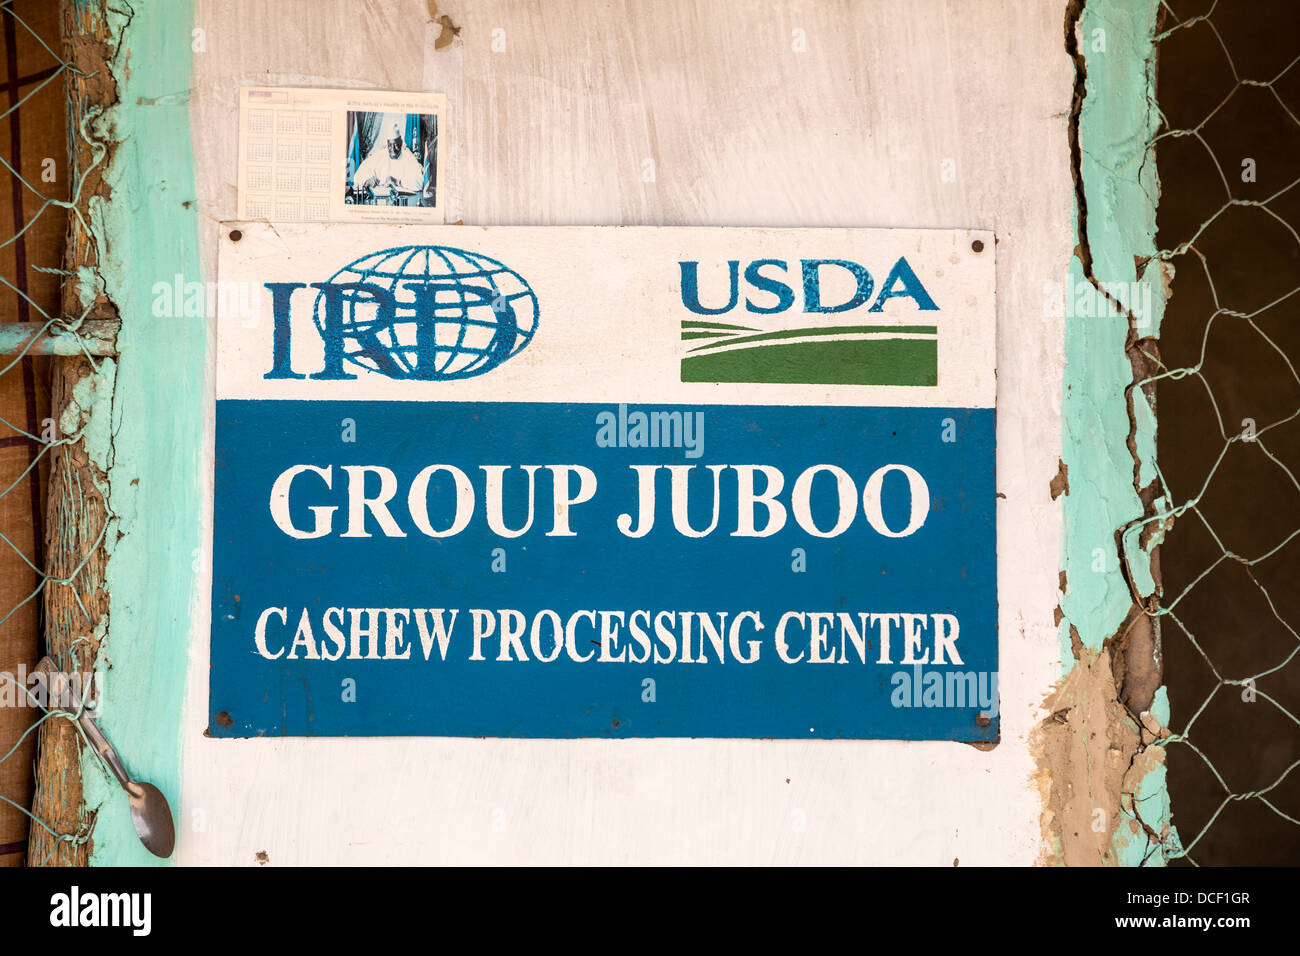 Cashew Nuts. Sign on Wall Identifying Group Juboo Cashew Processing Center, Fass Njaga Choi, North Bank Region, The Gambia Stock Photo